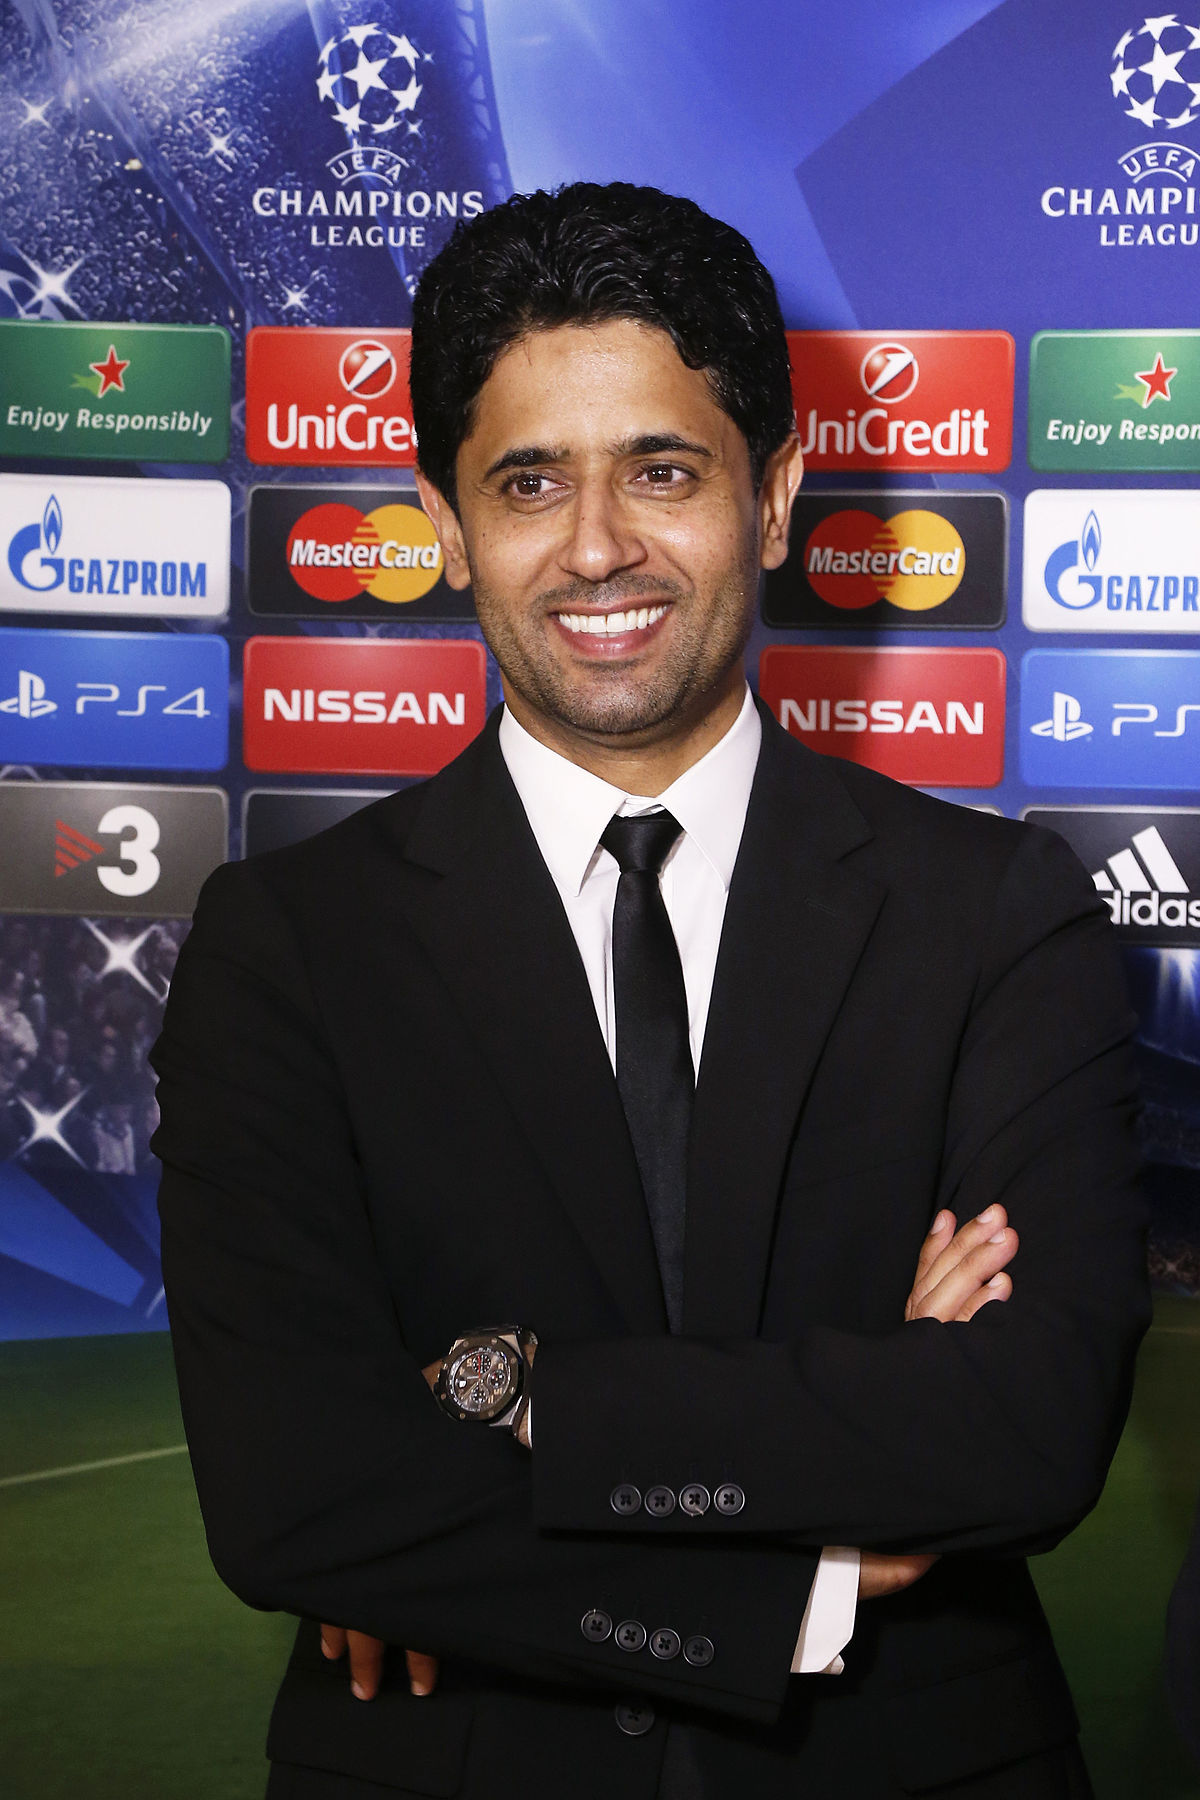 Does Nasser Al-Khelaifi Own PSG How Much Did Nasser Al-Khelaifi Buy PSG